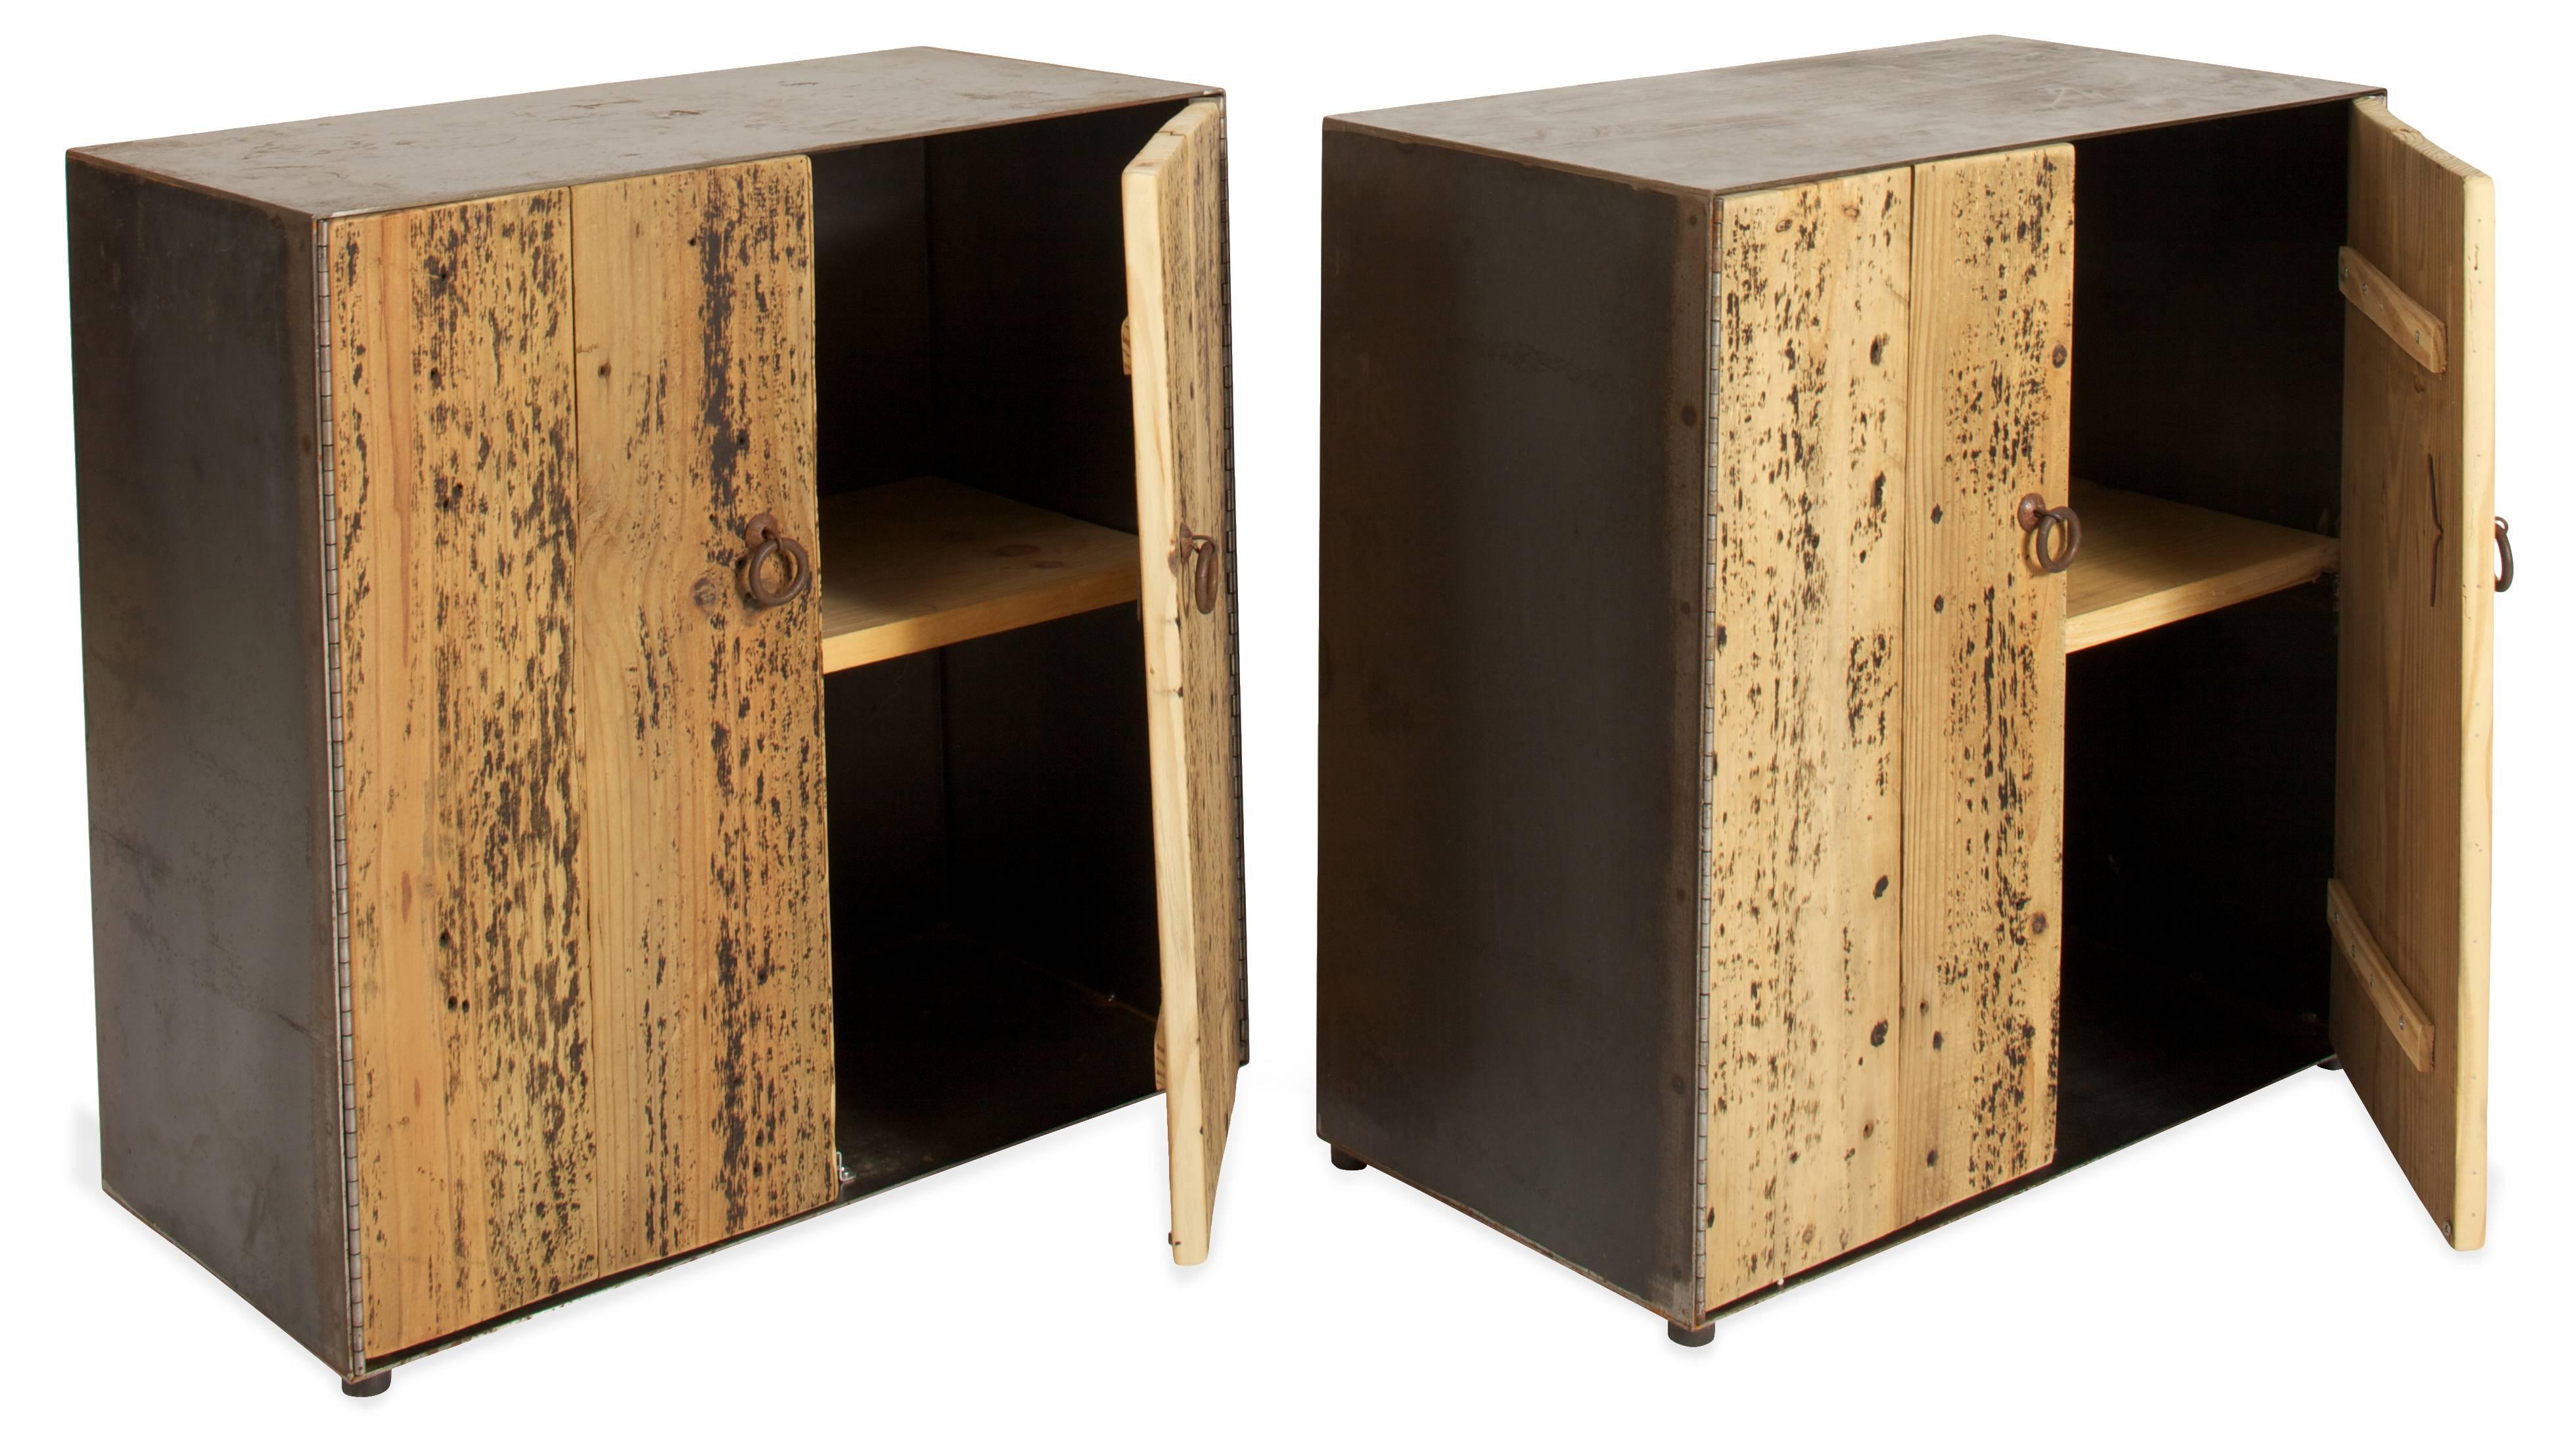 Cabinets composed of steel outer casings and rustic pine plank double doors and single pine shelves inside. Paint residue on doors give a speckled effect - steel ring pulls. Can be used as nightstands or side tables. Sold singly. We can add